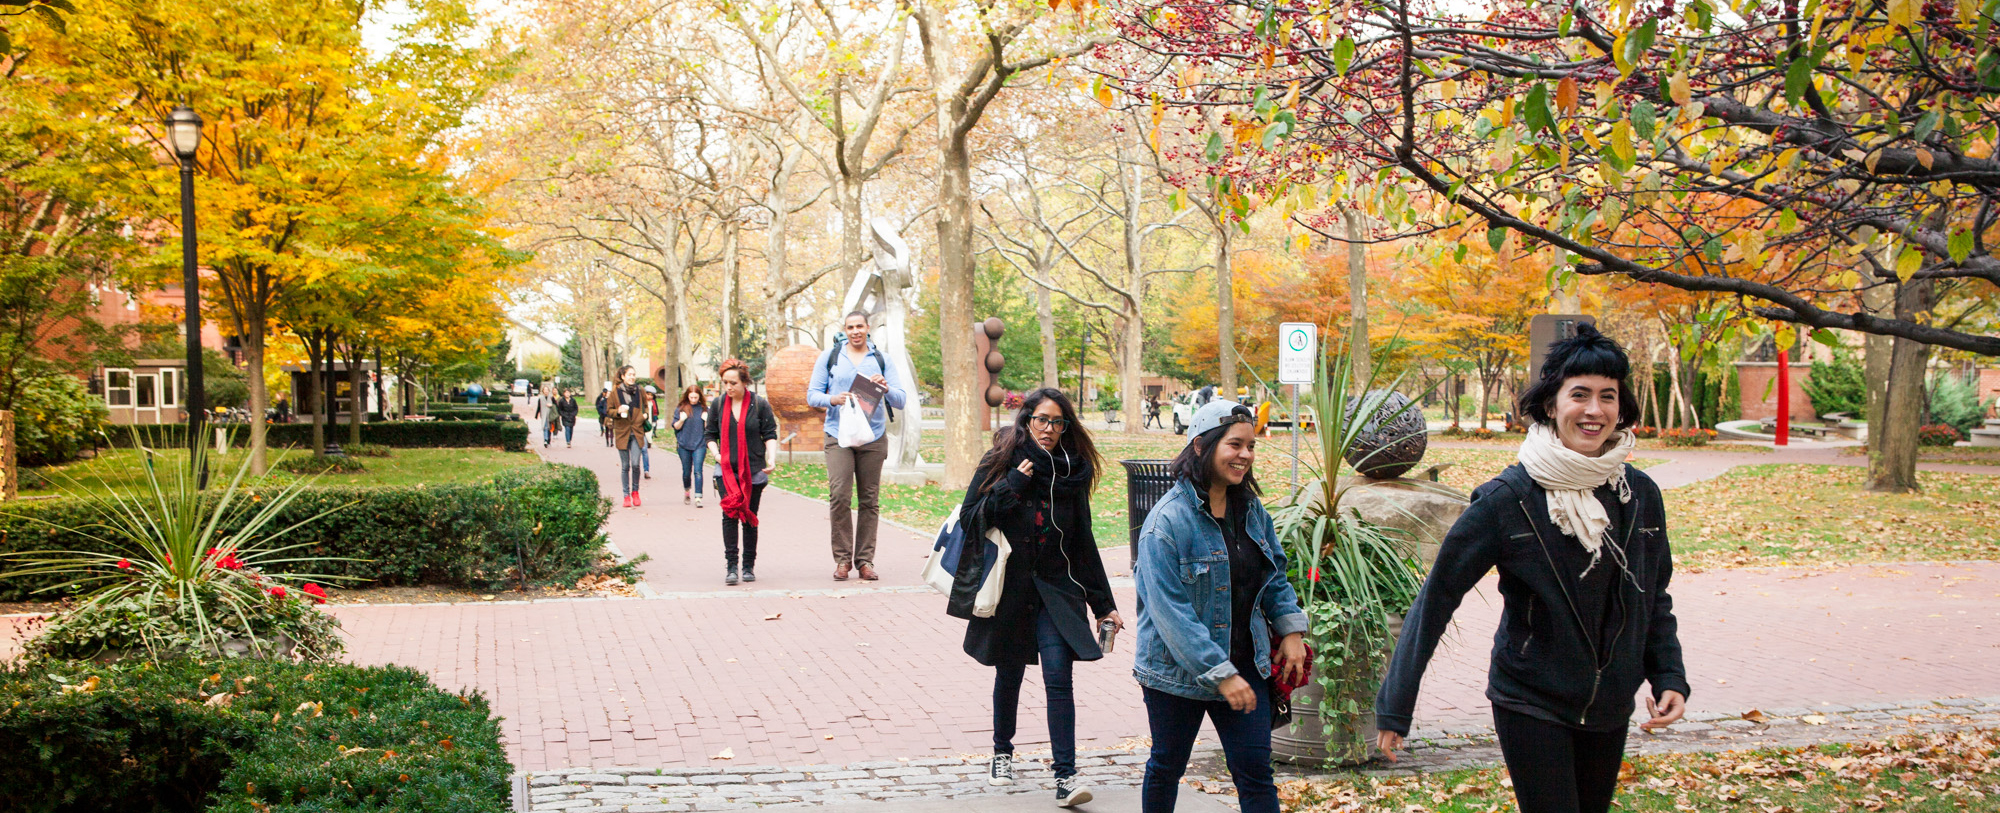 Students walk through a wooded park on red brick path